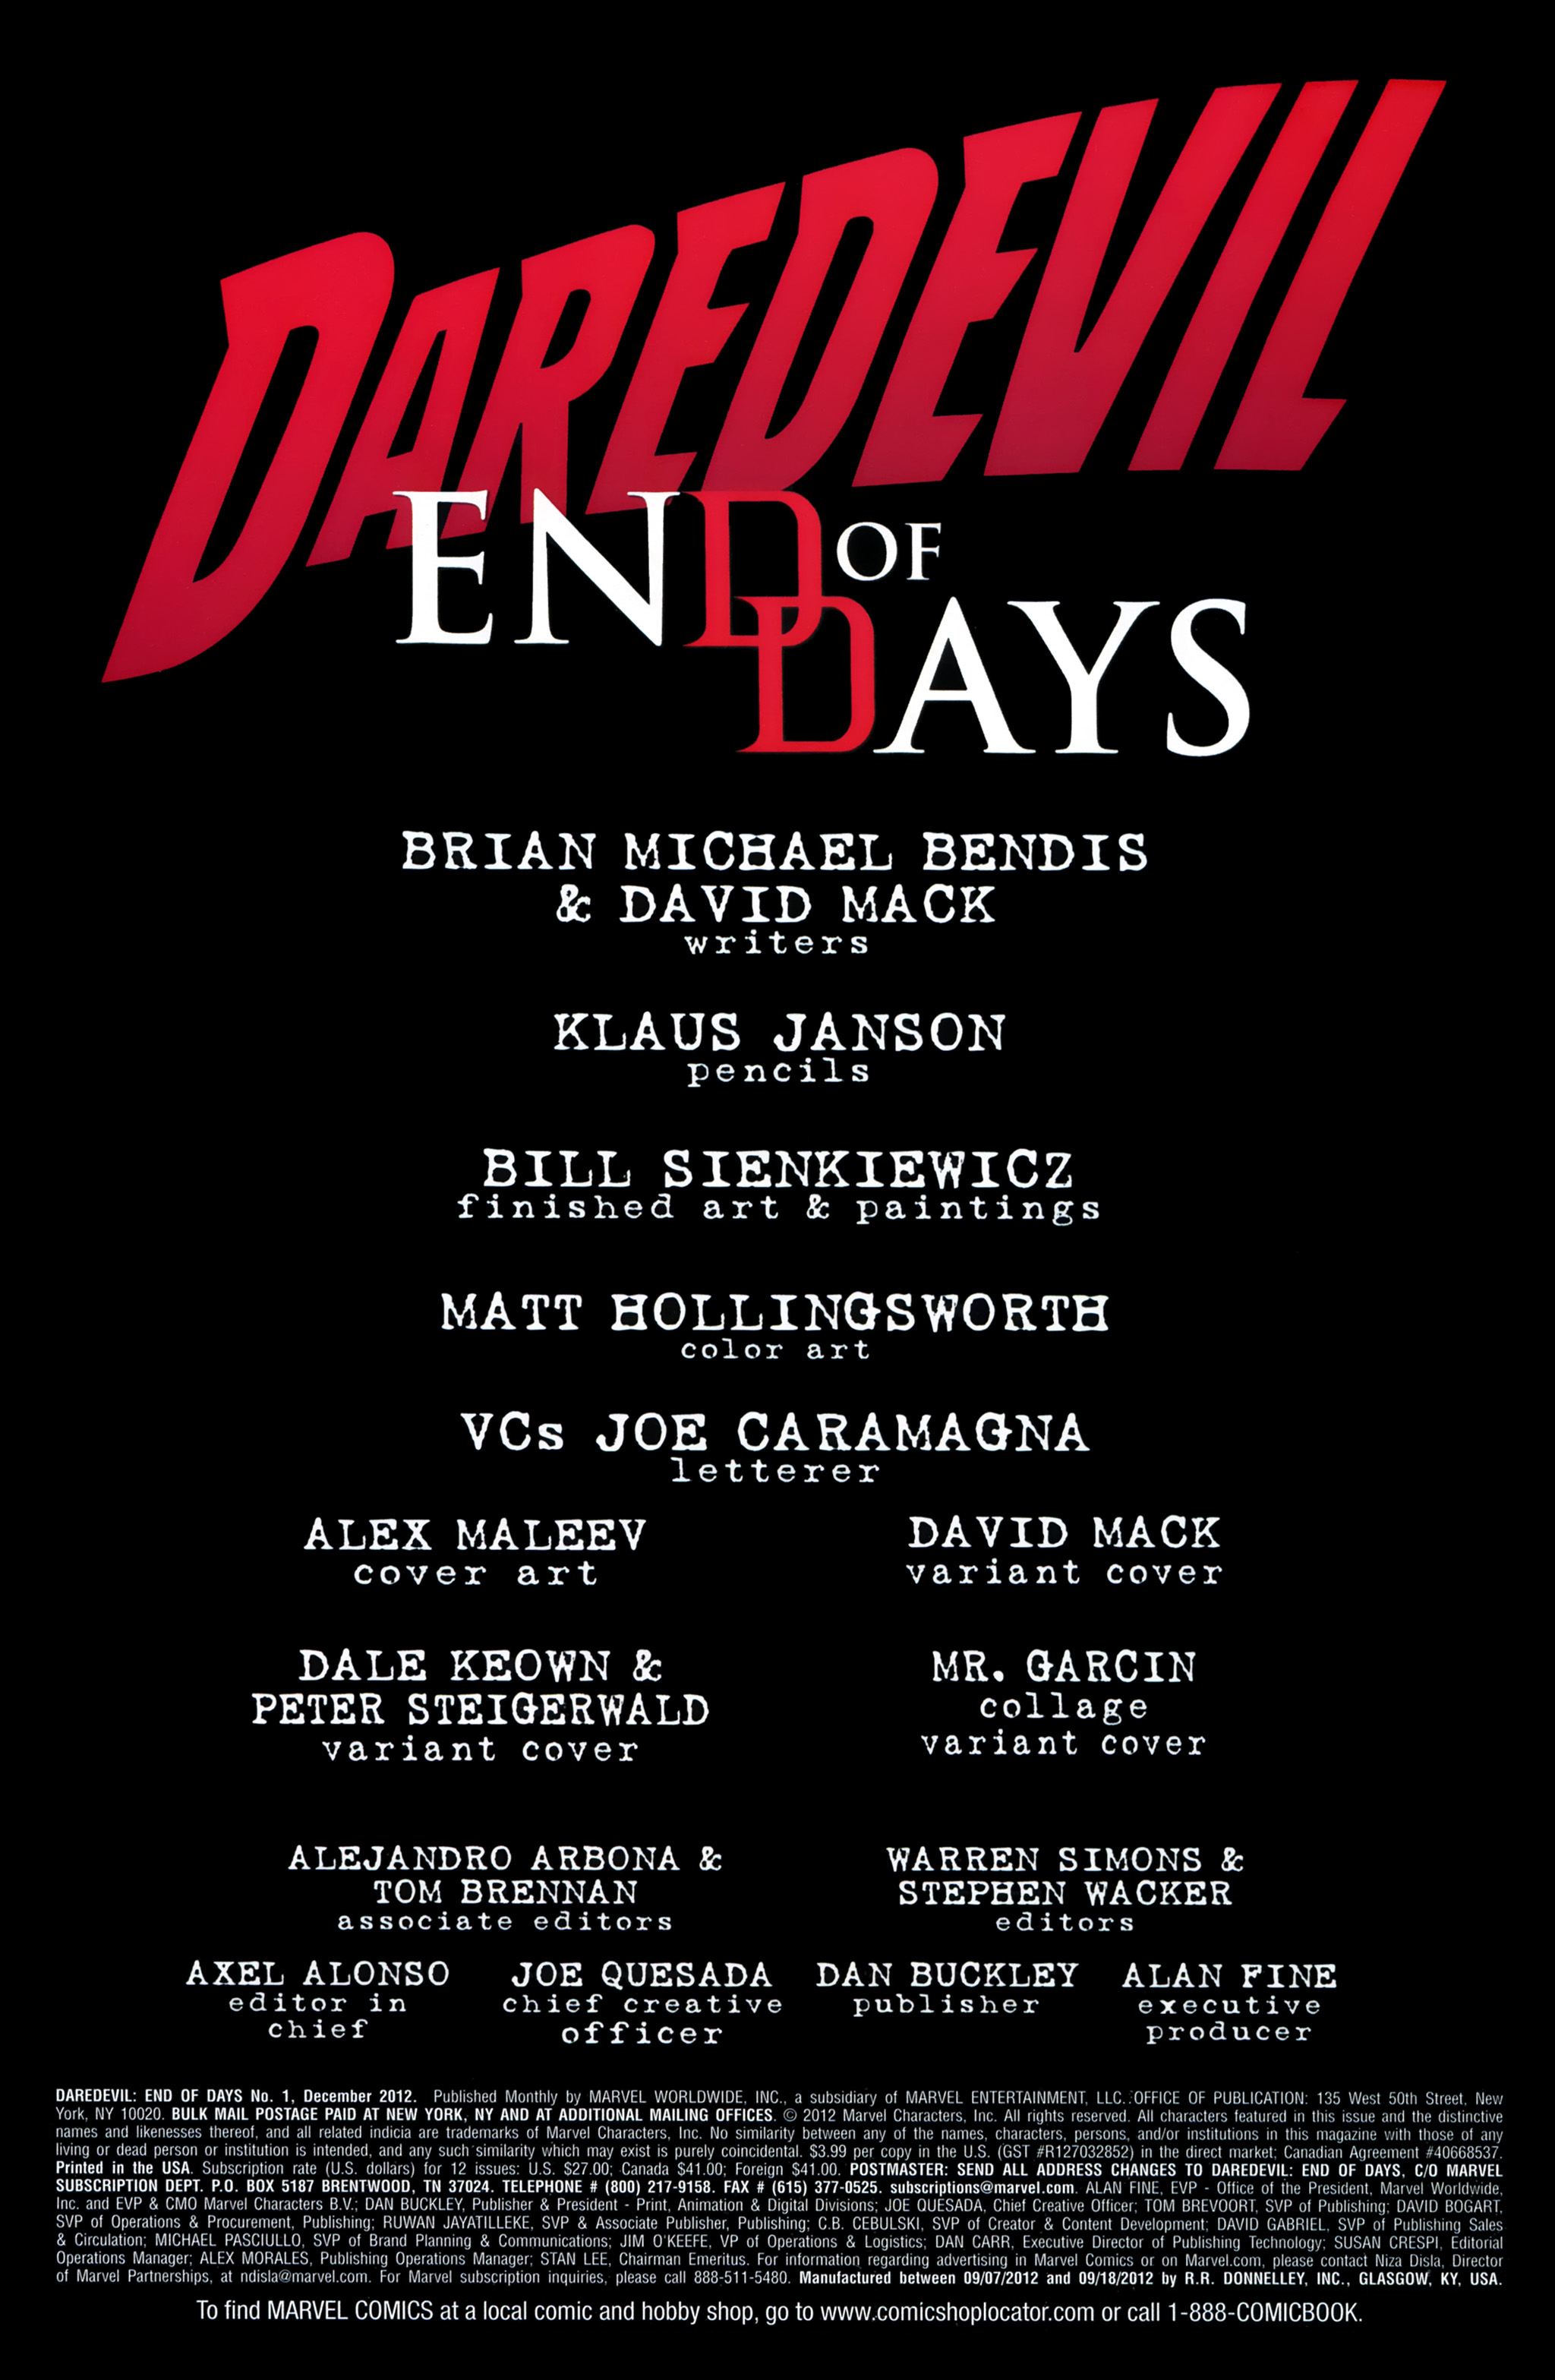 Read online Daredevil: End of Days comic -  Issue #1 - 5